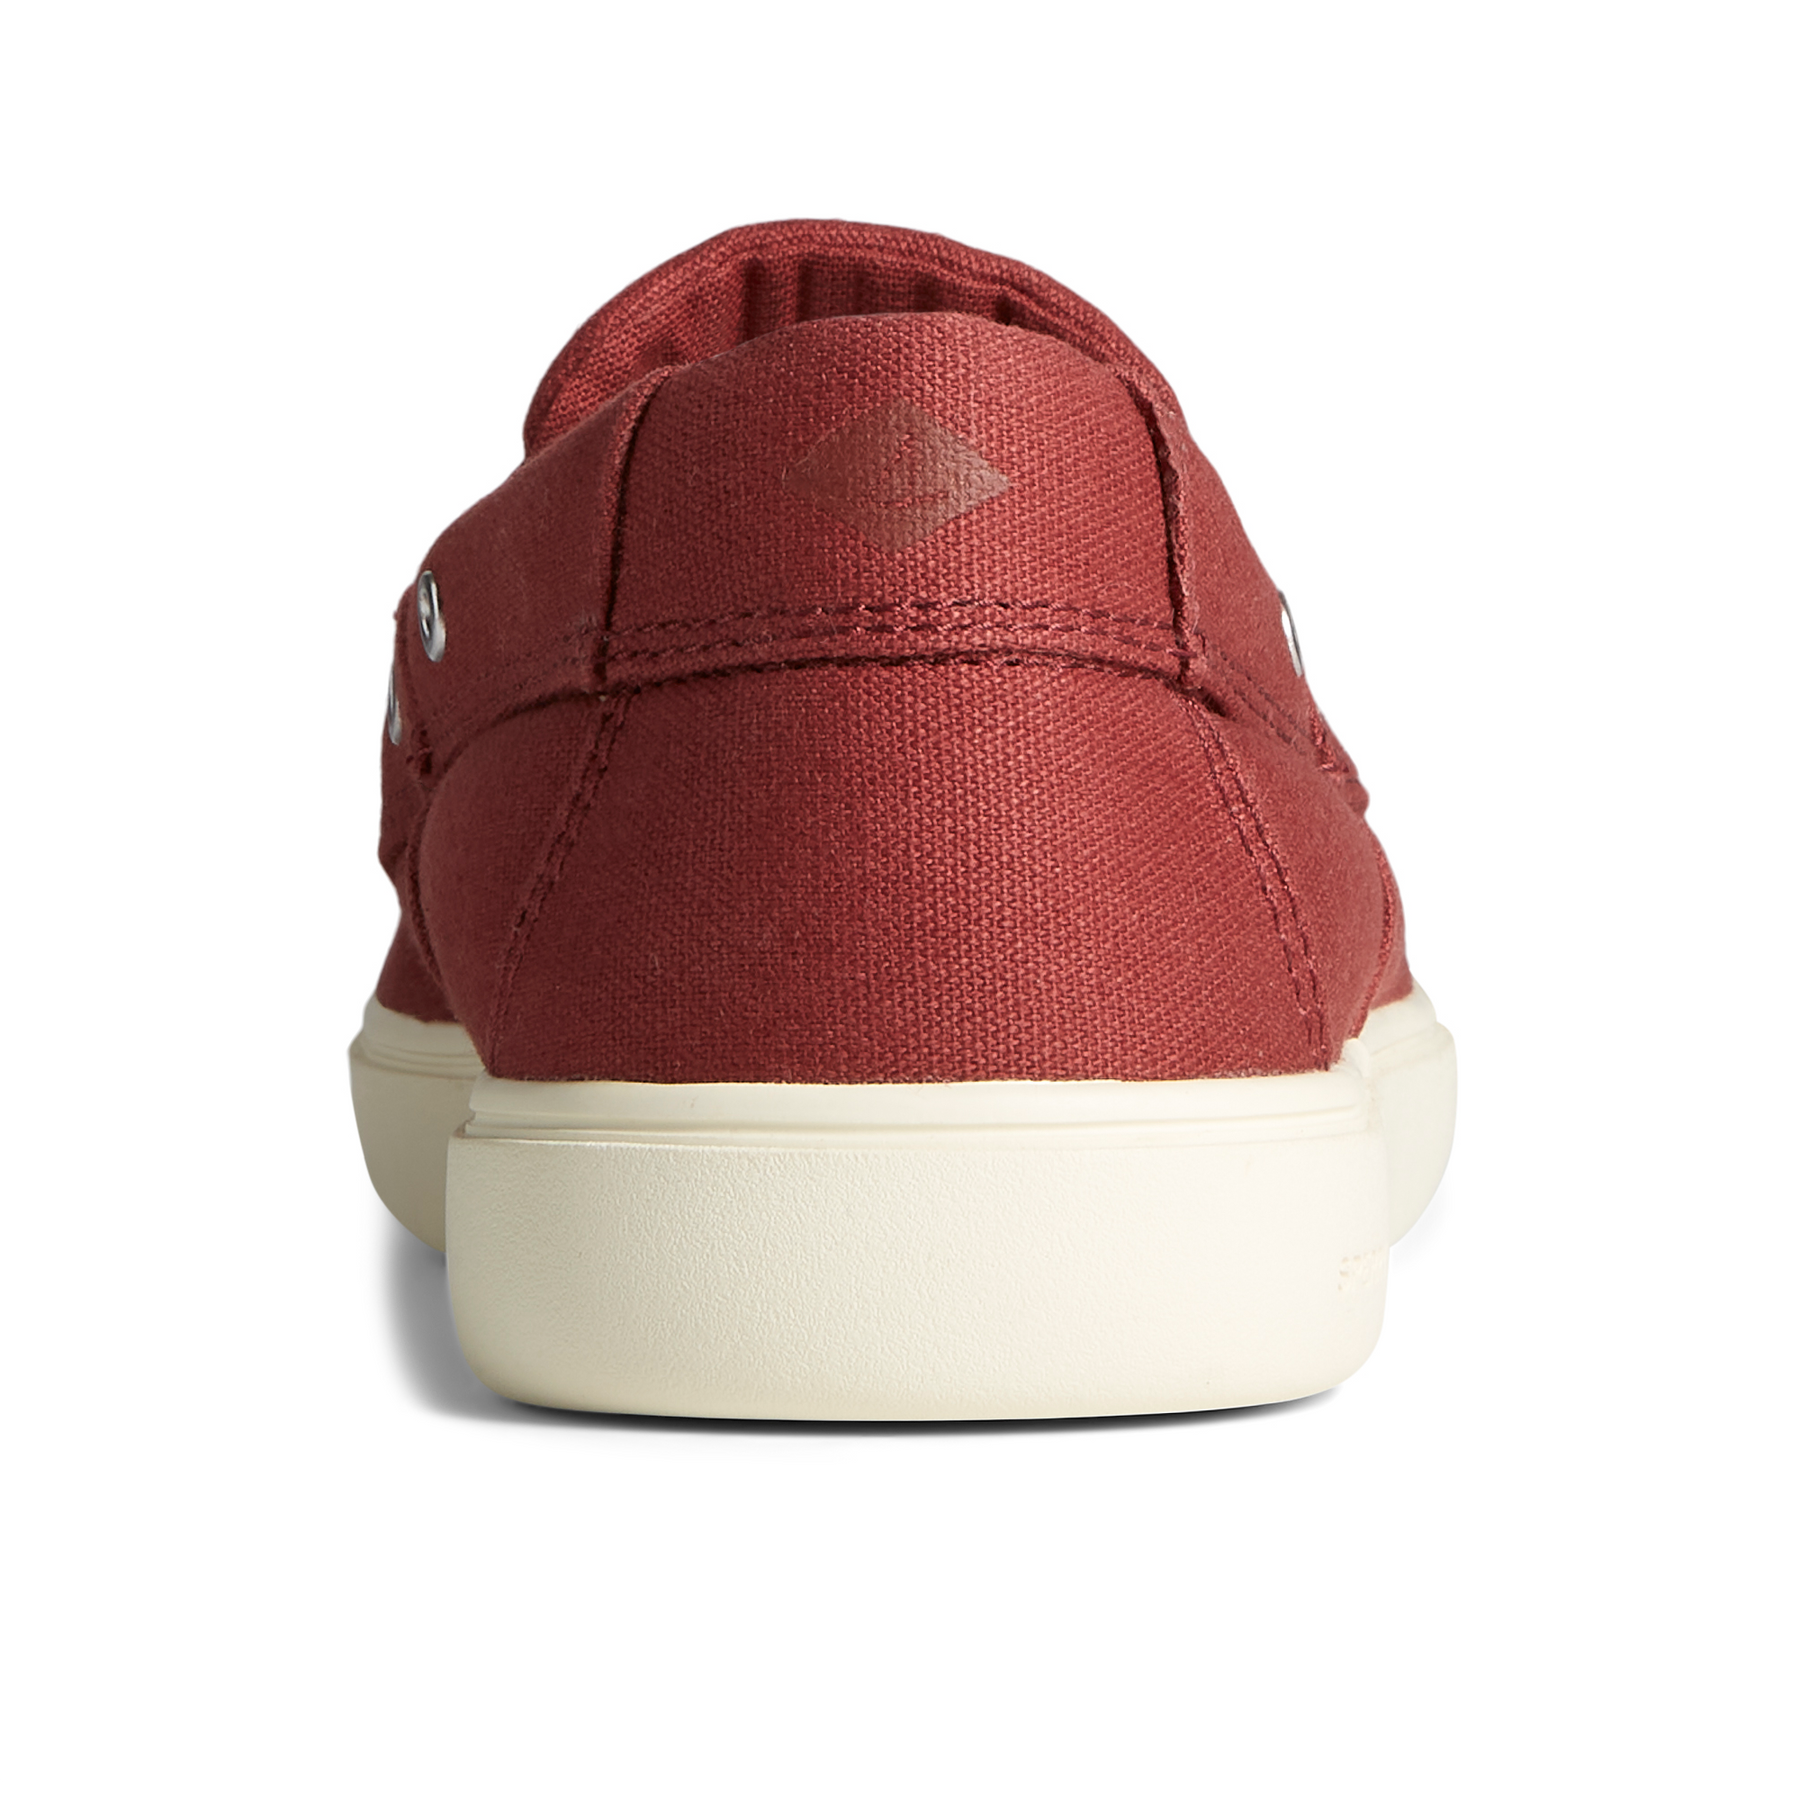 Men's Outer Banks 2-Eye Canvas Red Boat Shoe (STS23866)